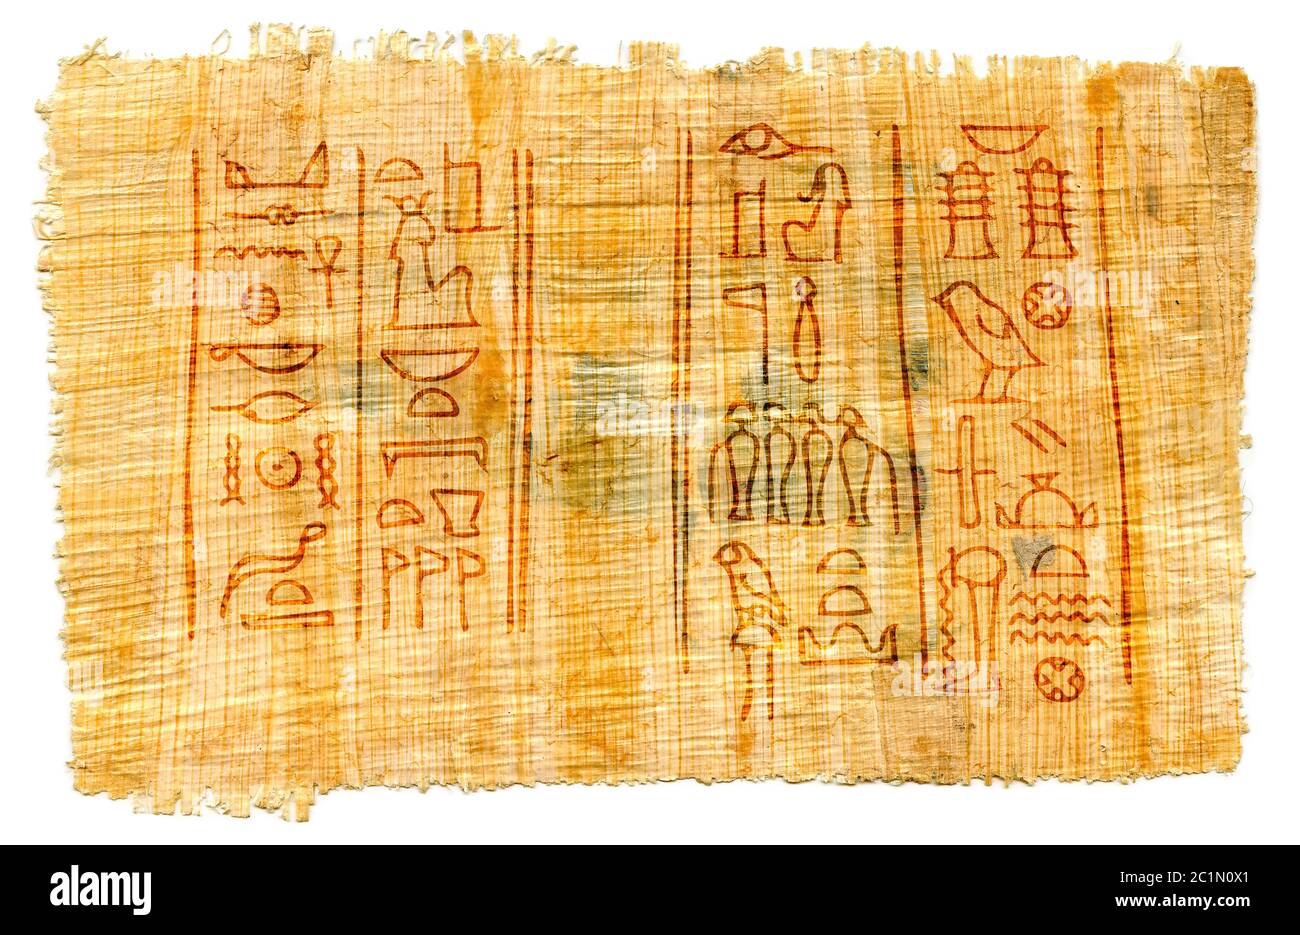 Egyptian papyrus with hieroglyphs, manuscript from The Karnak temple, Luxor, Egypt. Stock Photo